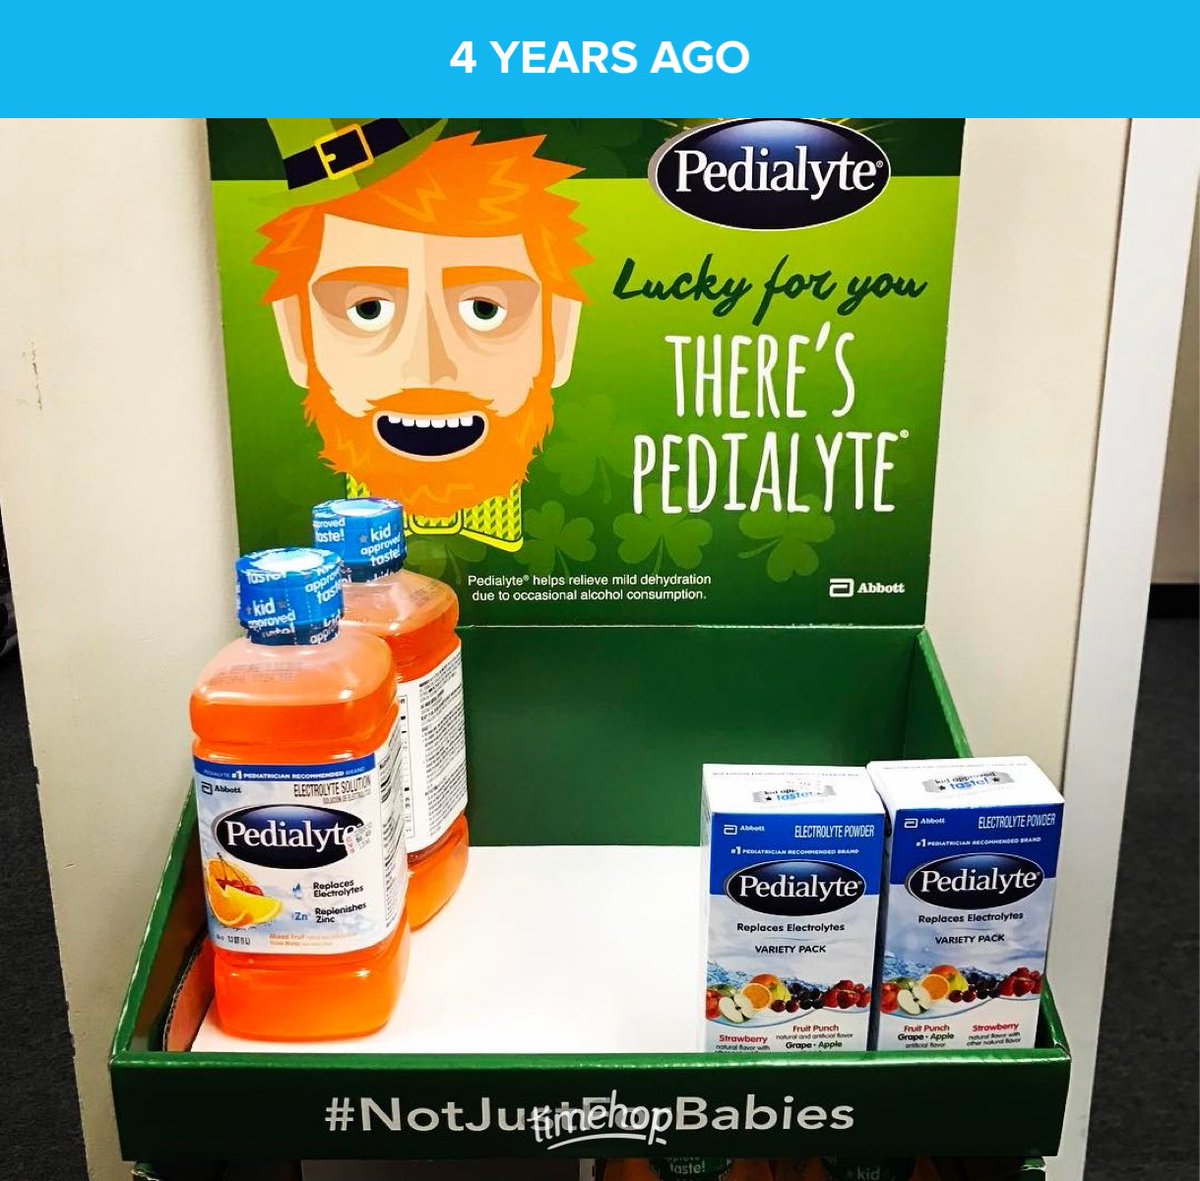 Happy anniversary to my favorite ⁦@pedialyte⁩ campaign ☘️ #notjustforbabies